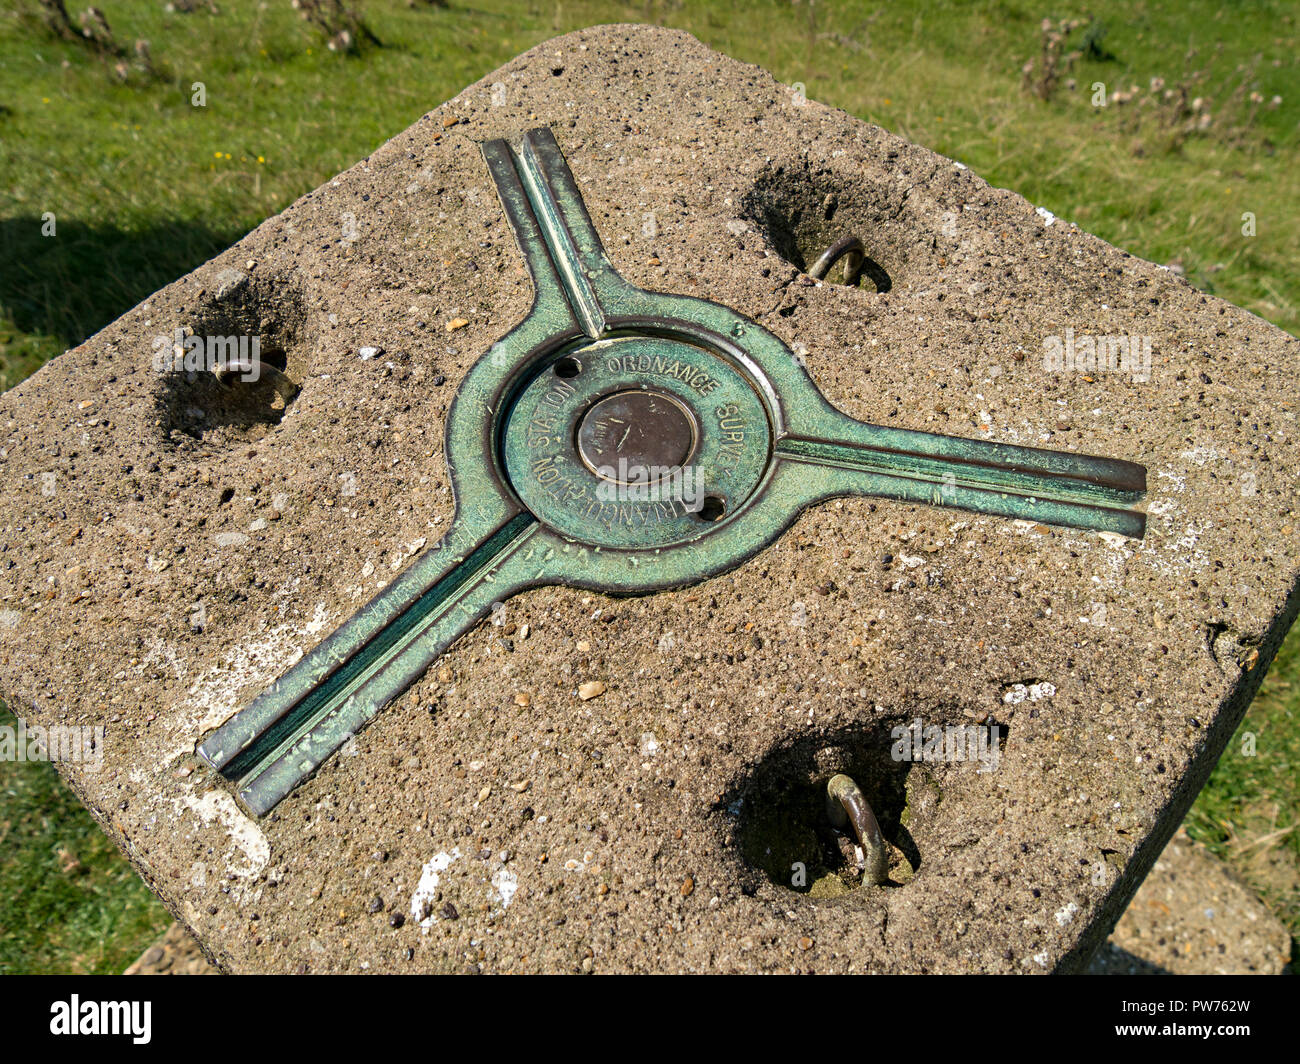 Three point kinematic mount (spider) for a surveying theodolite on top of Ordnance Survey trig point triangulation station, Leicestershire, England, Stock Photo